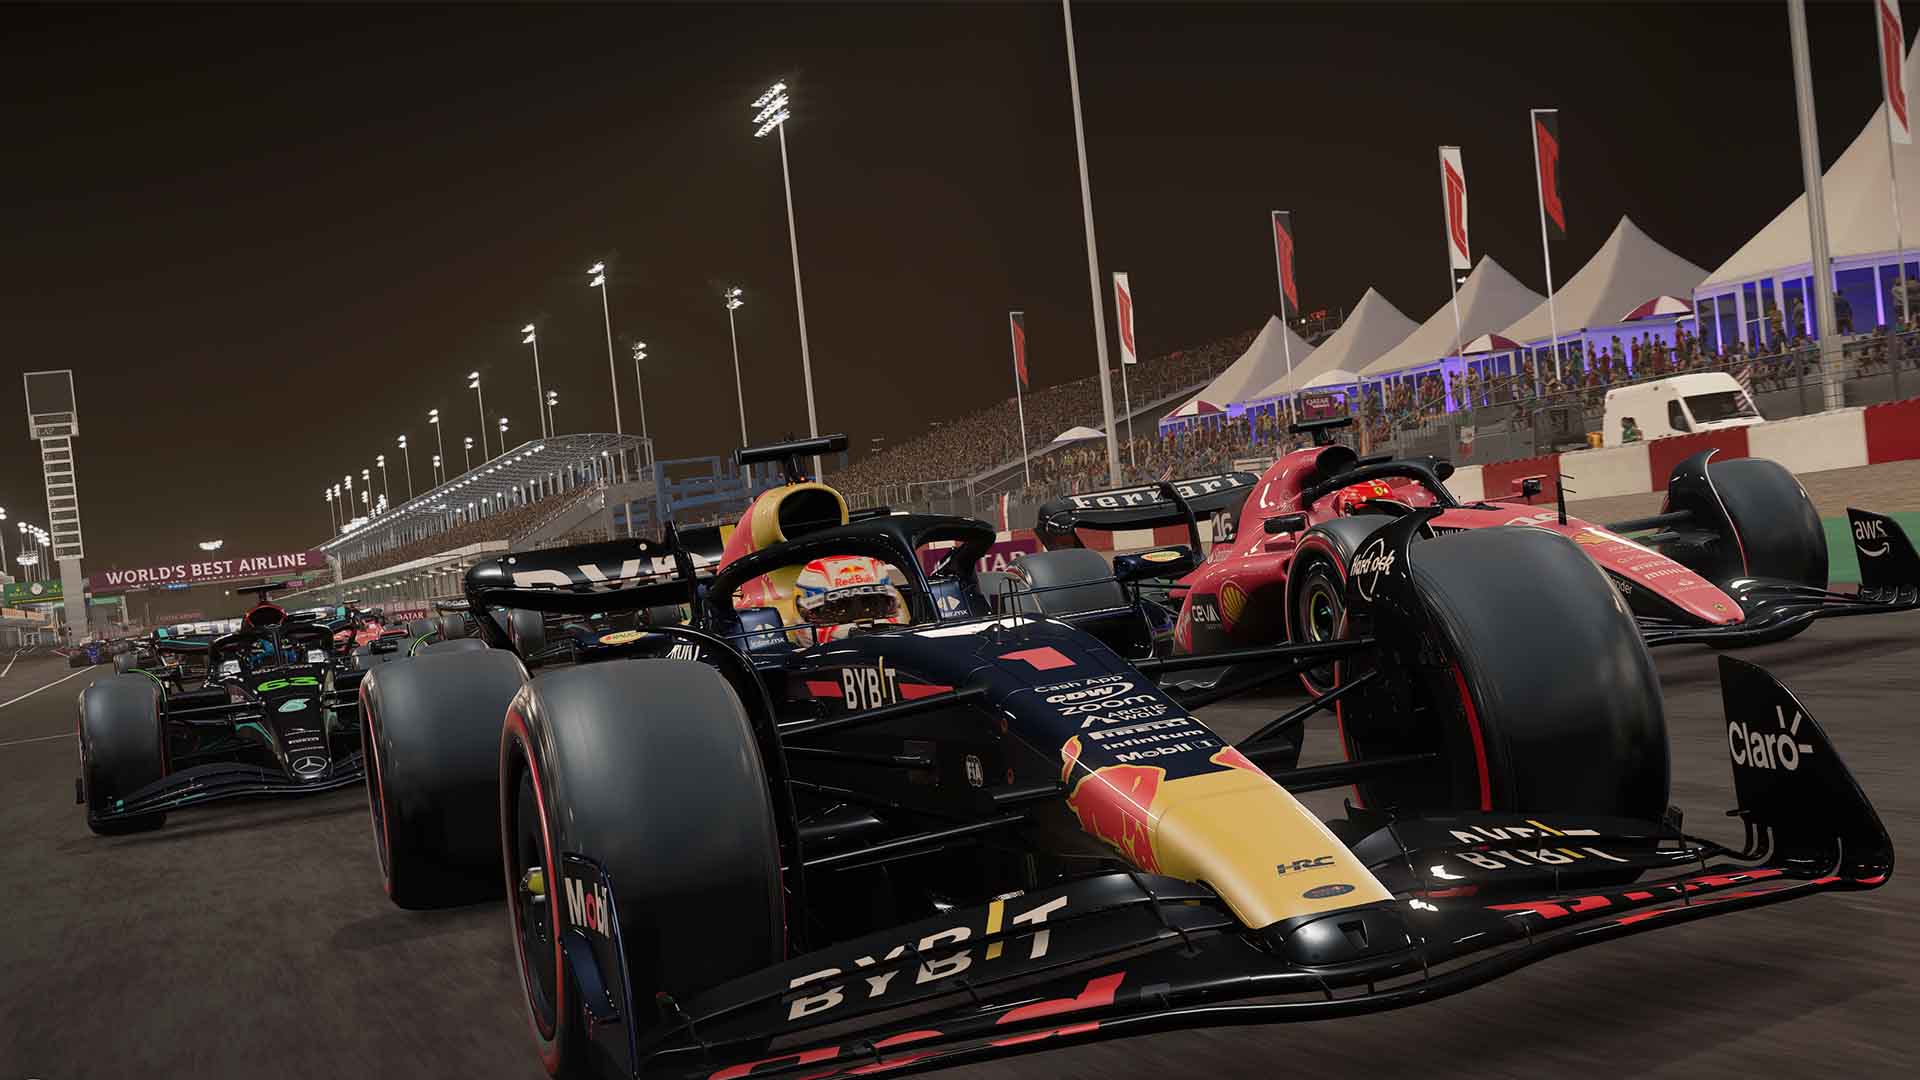 Watch the Reveal Trailer for the New F1 23 EA Sports Video Game